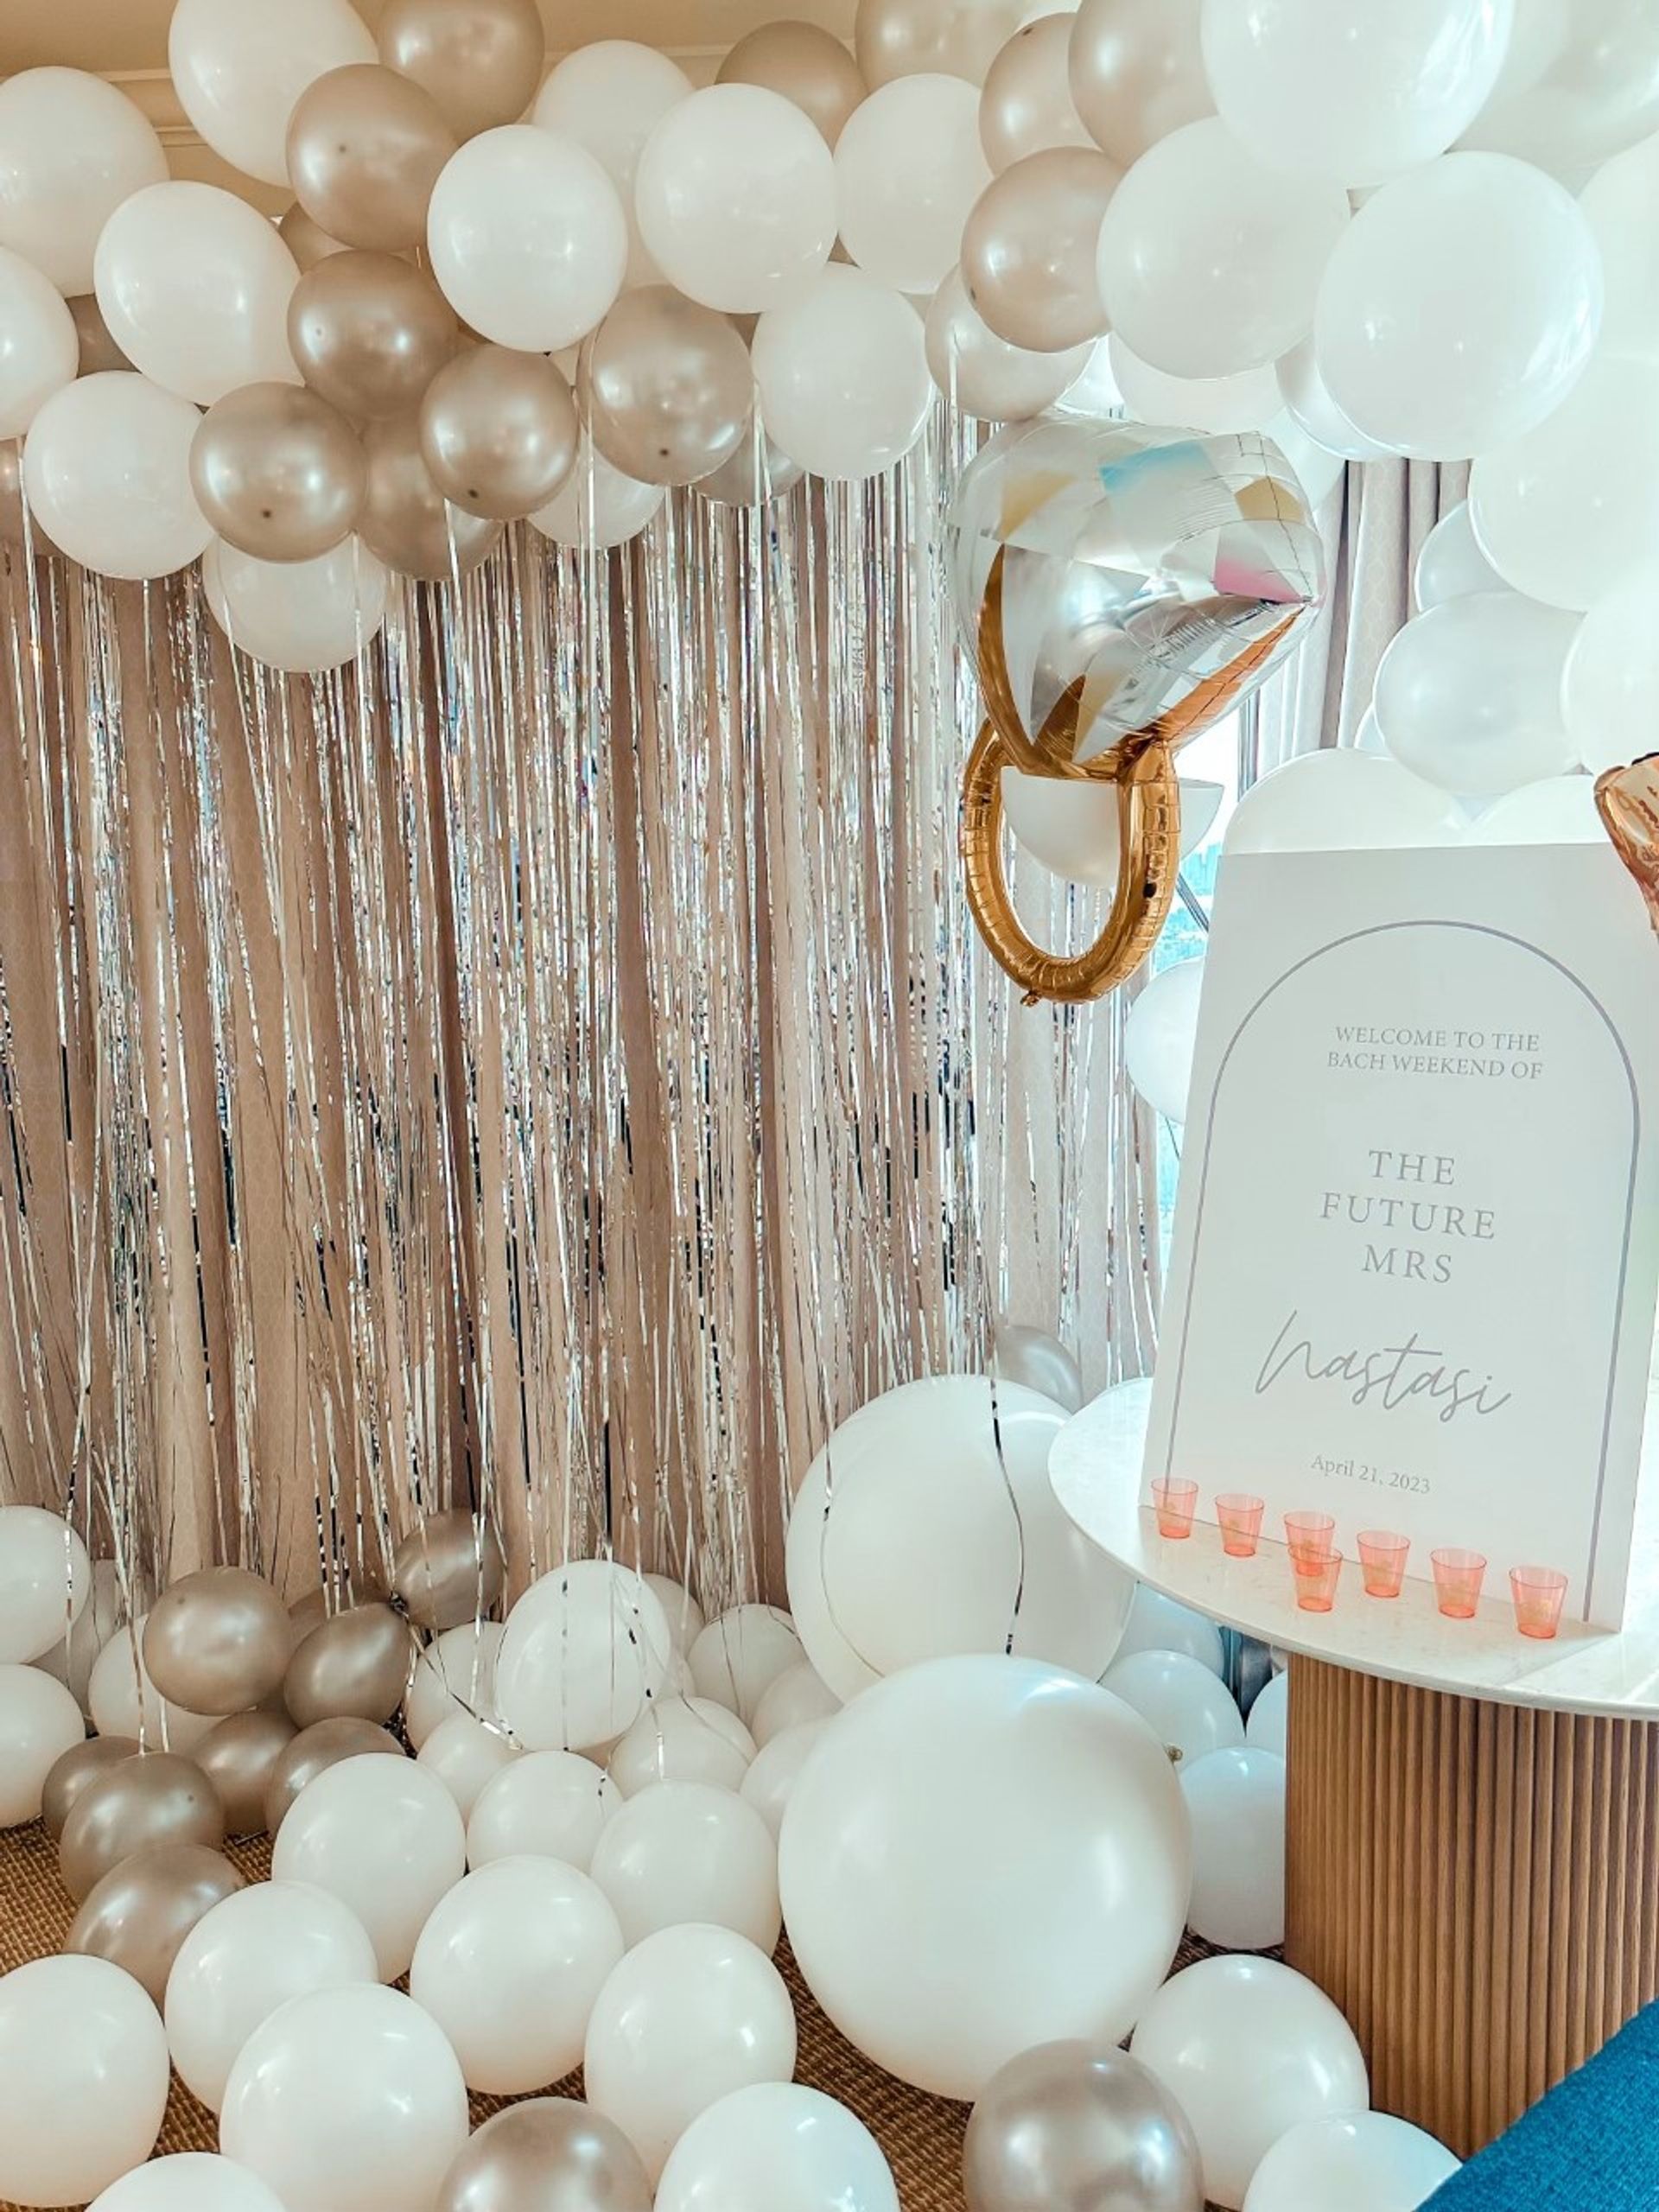 7 Instagram-Worthy Hen Party Decorations The Bride Will Love